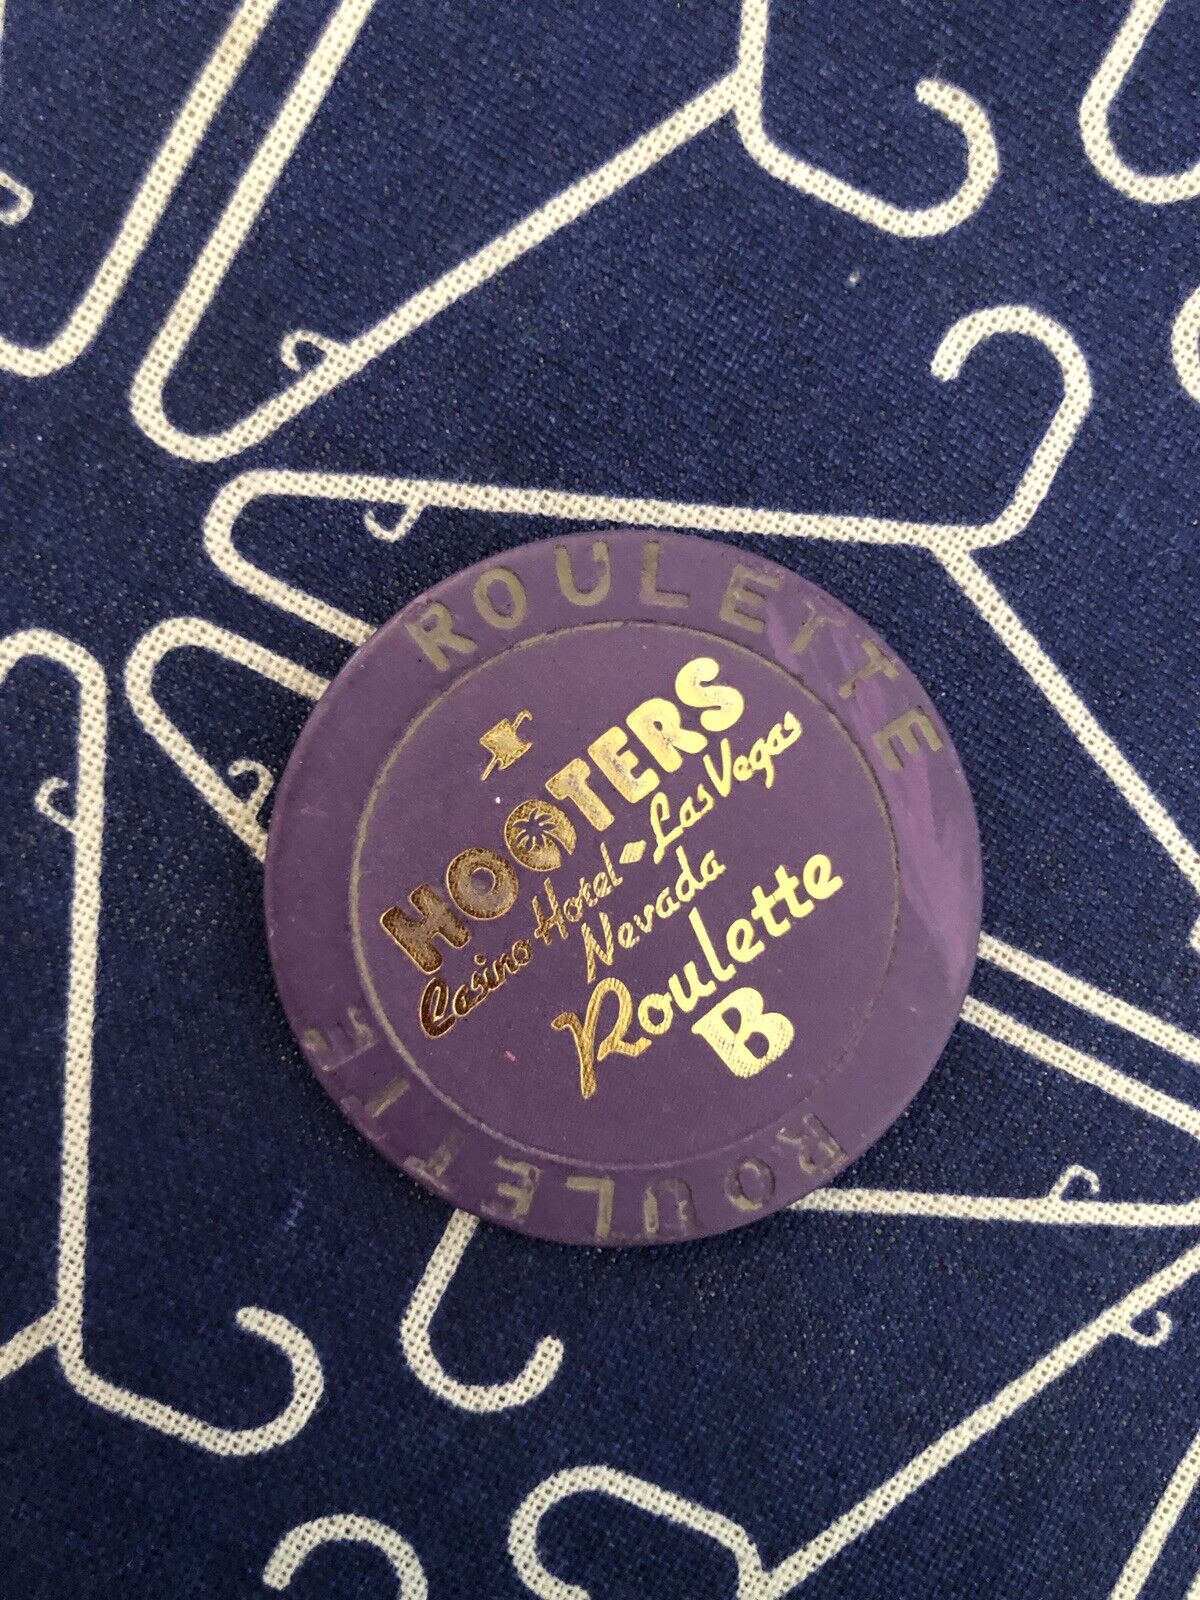 CASINO CHIP HOOTERS LAS VEGAS NV 2006 ROULETTE B TABLE GAMES PURPLE Collectable